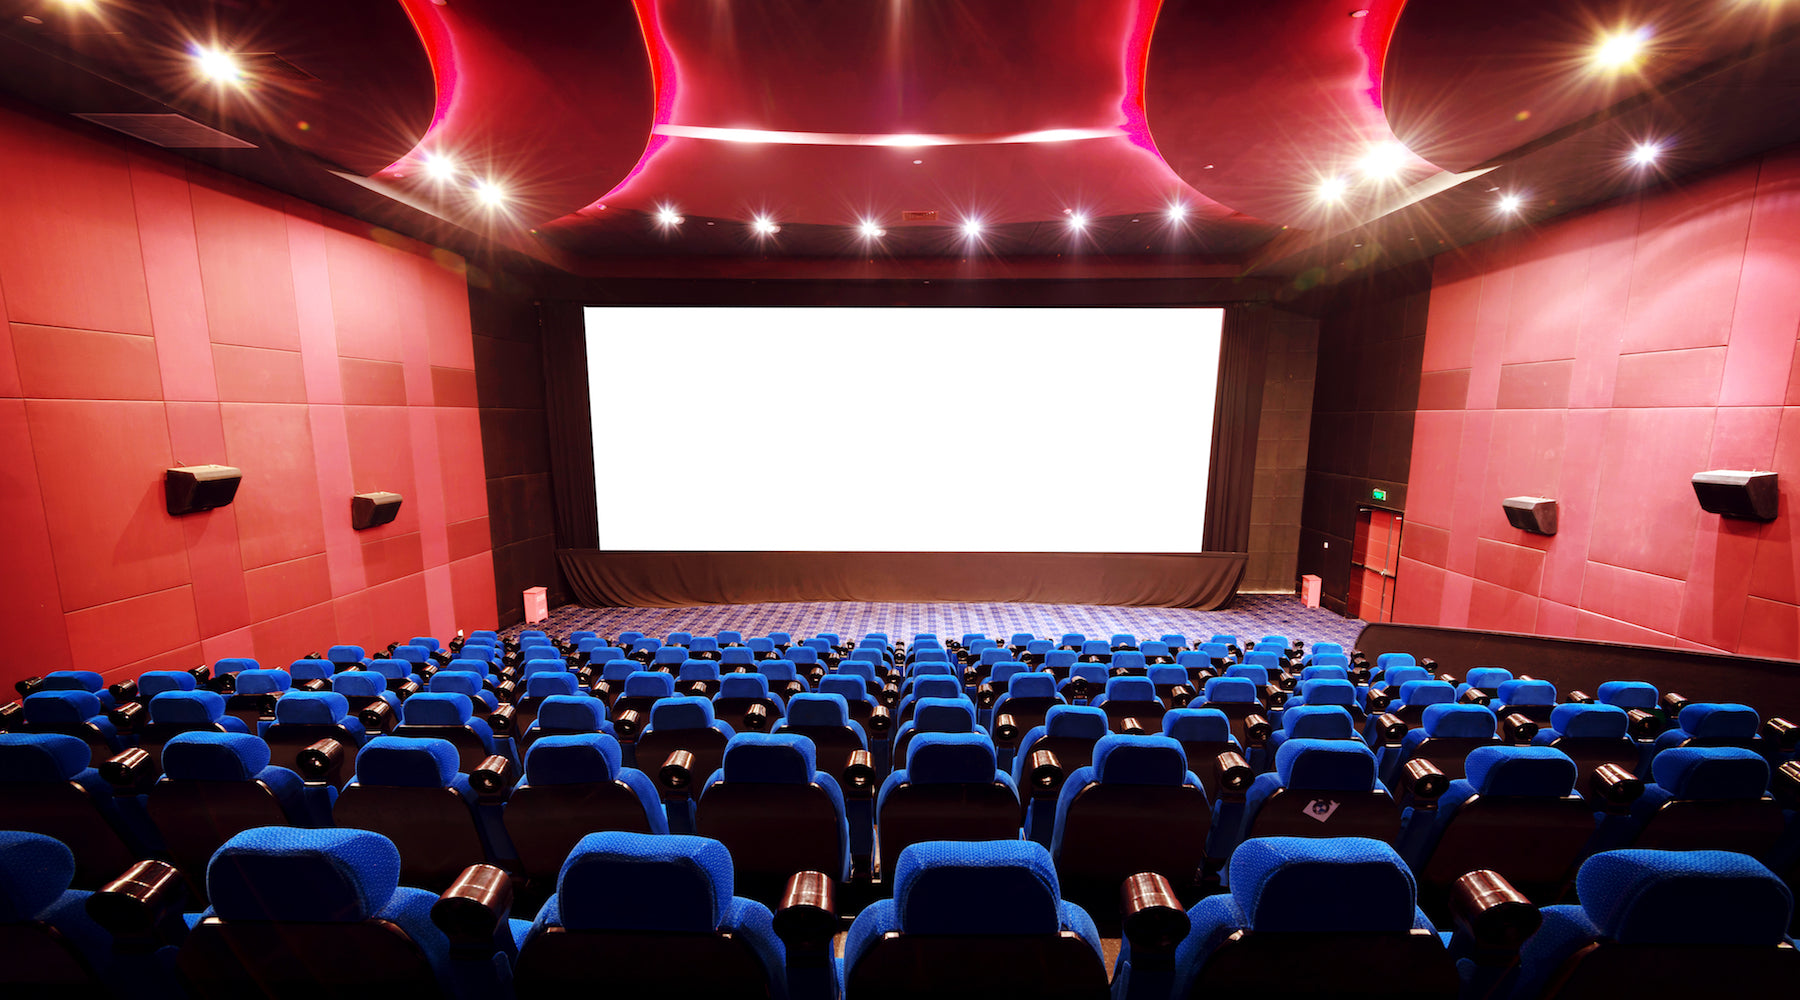 Theater lighting shown installed in an empty movie theater with red walls and blue seats